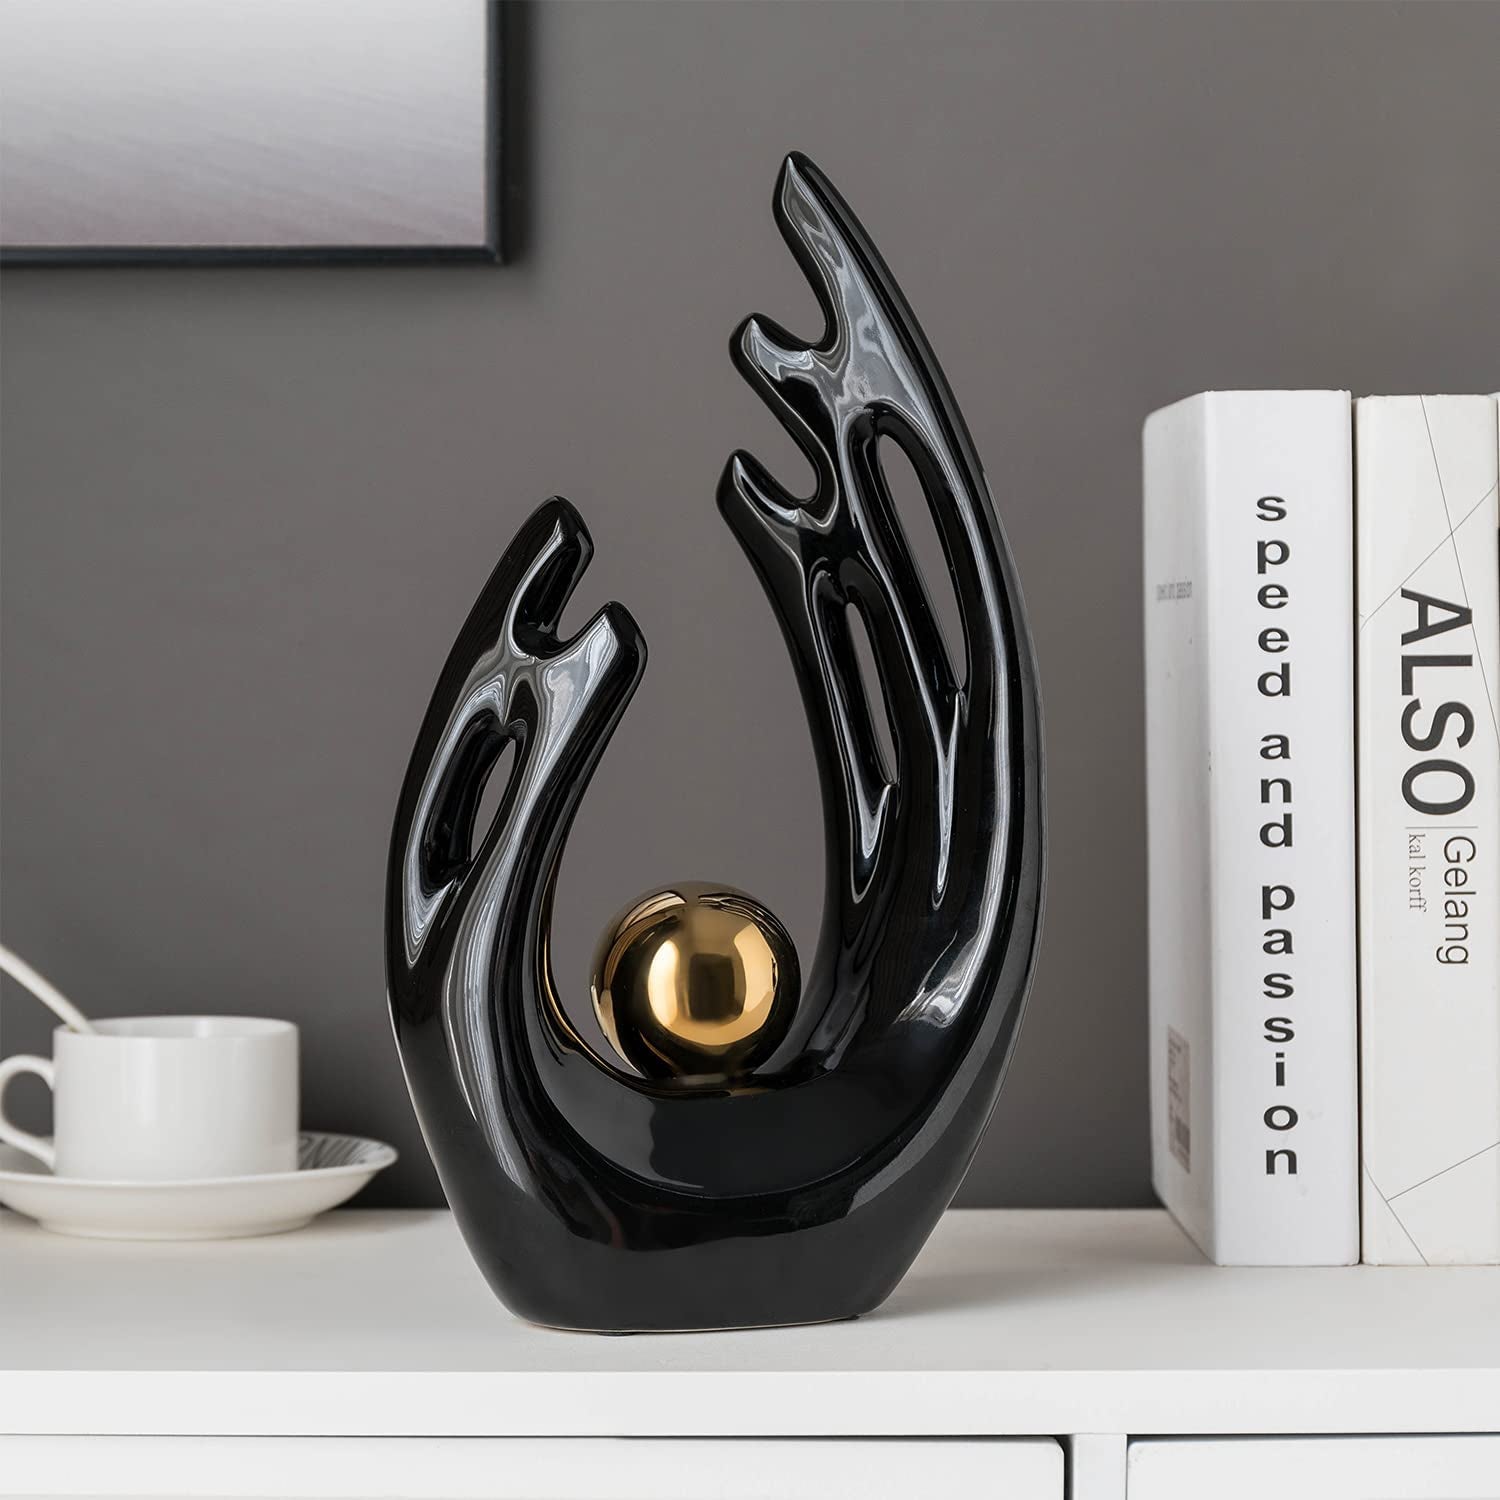 "Contemporary Ceramic Statues: Stylish Home Decor Accents for Living Room, Office, and More!"